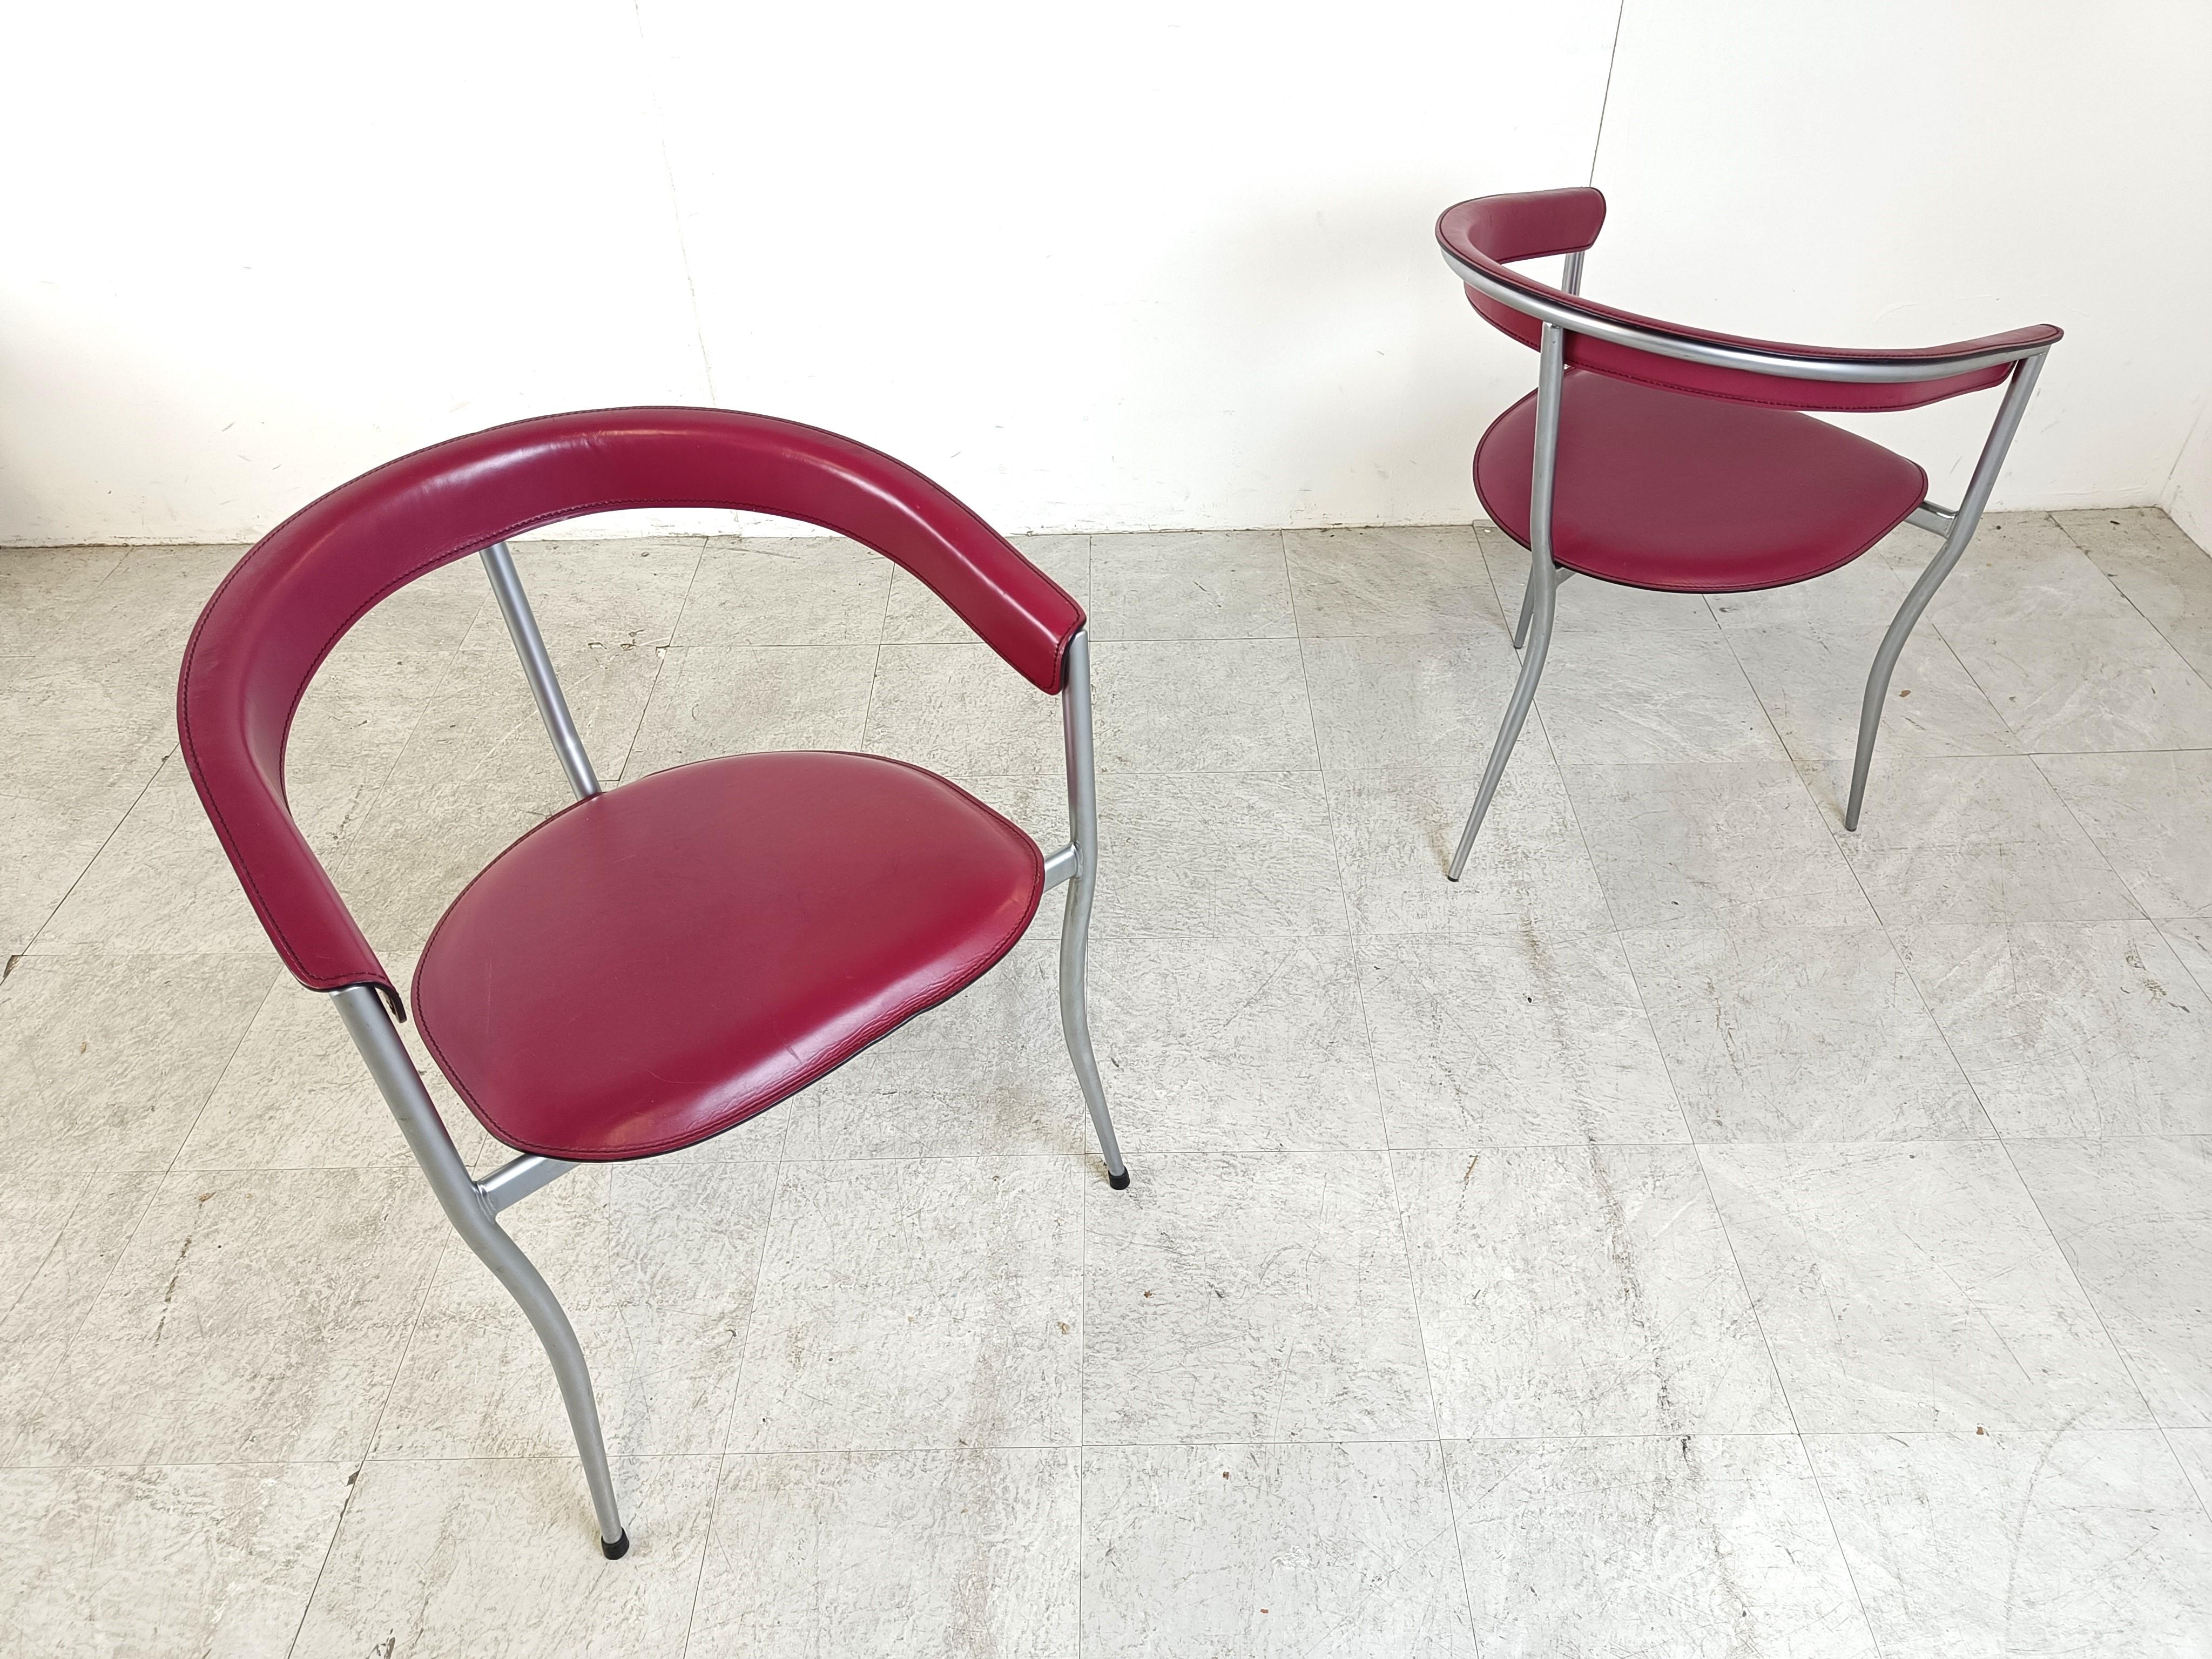 Vintage leather armchairs by Arrben italy, 1980s - set of 8 For Sale 4